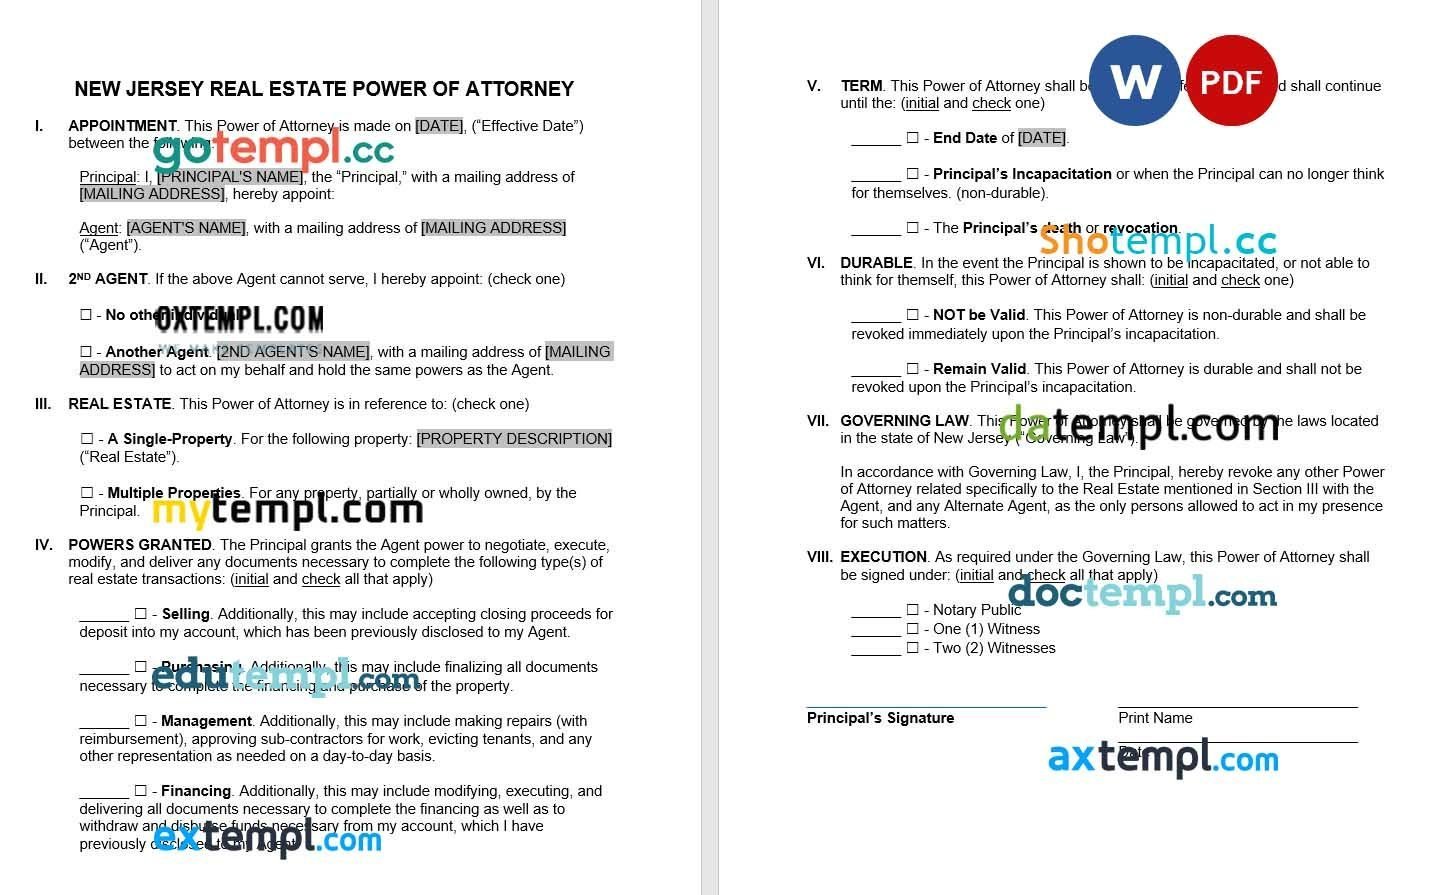 New Jersey Real Estate Power of Attorney Form example, fully editable